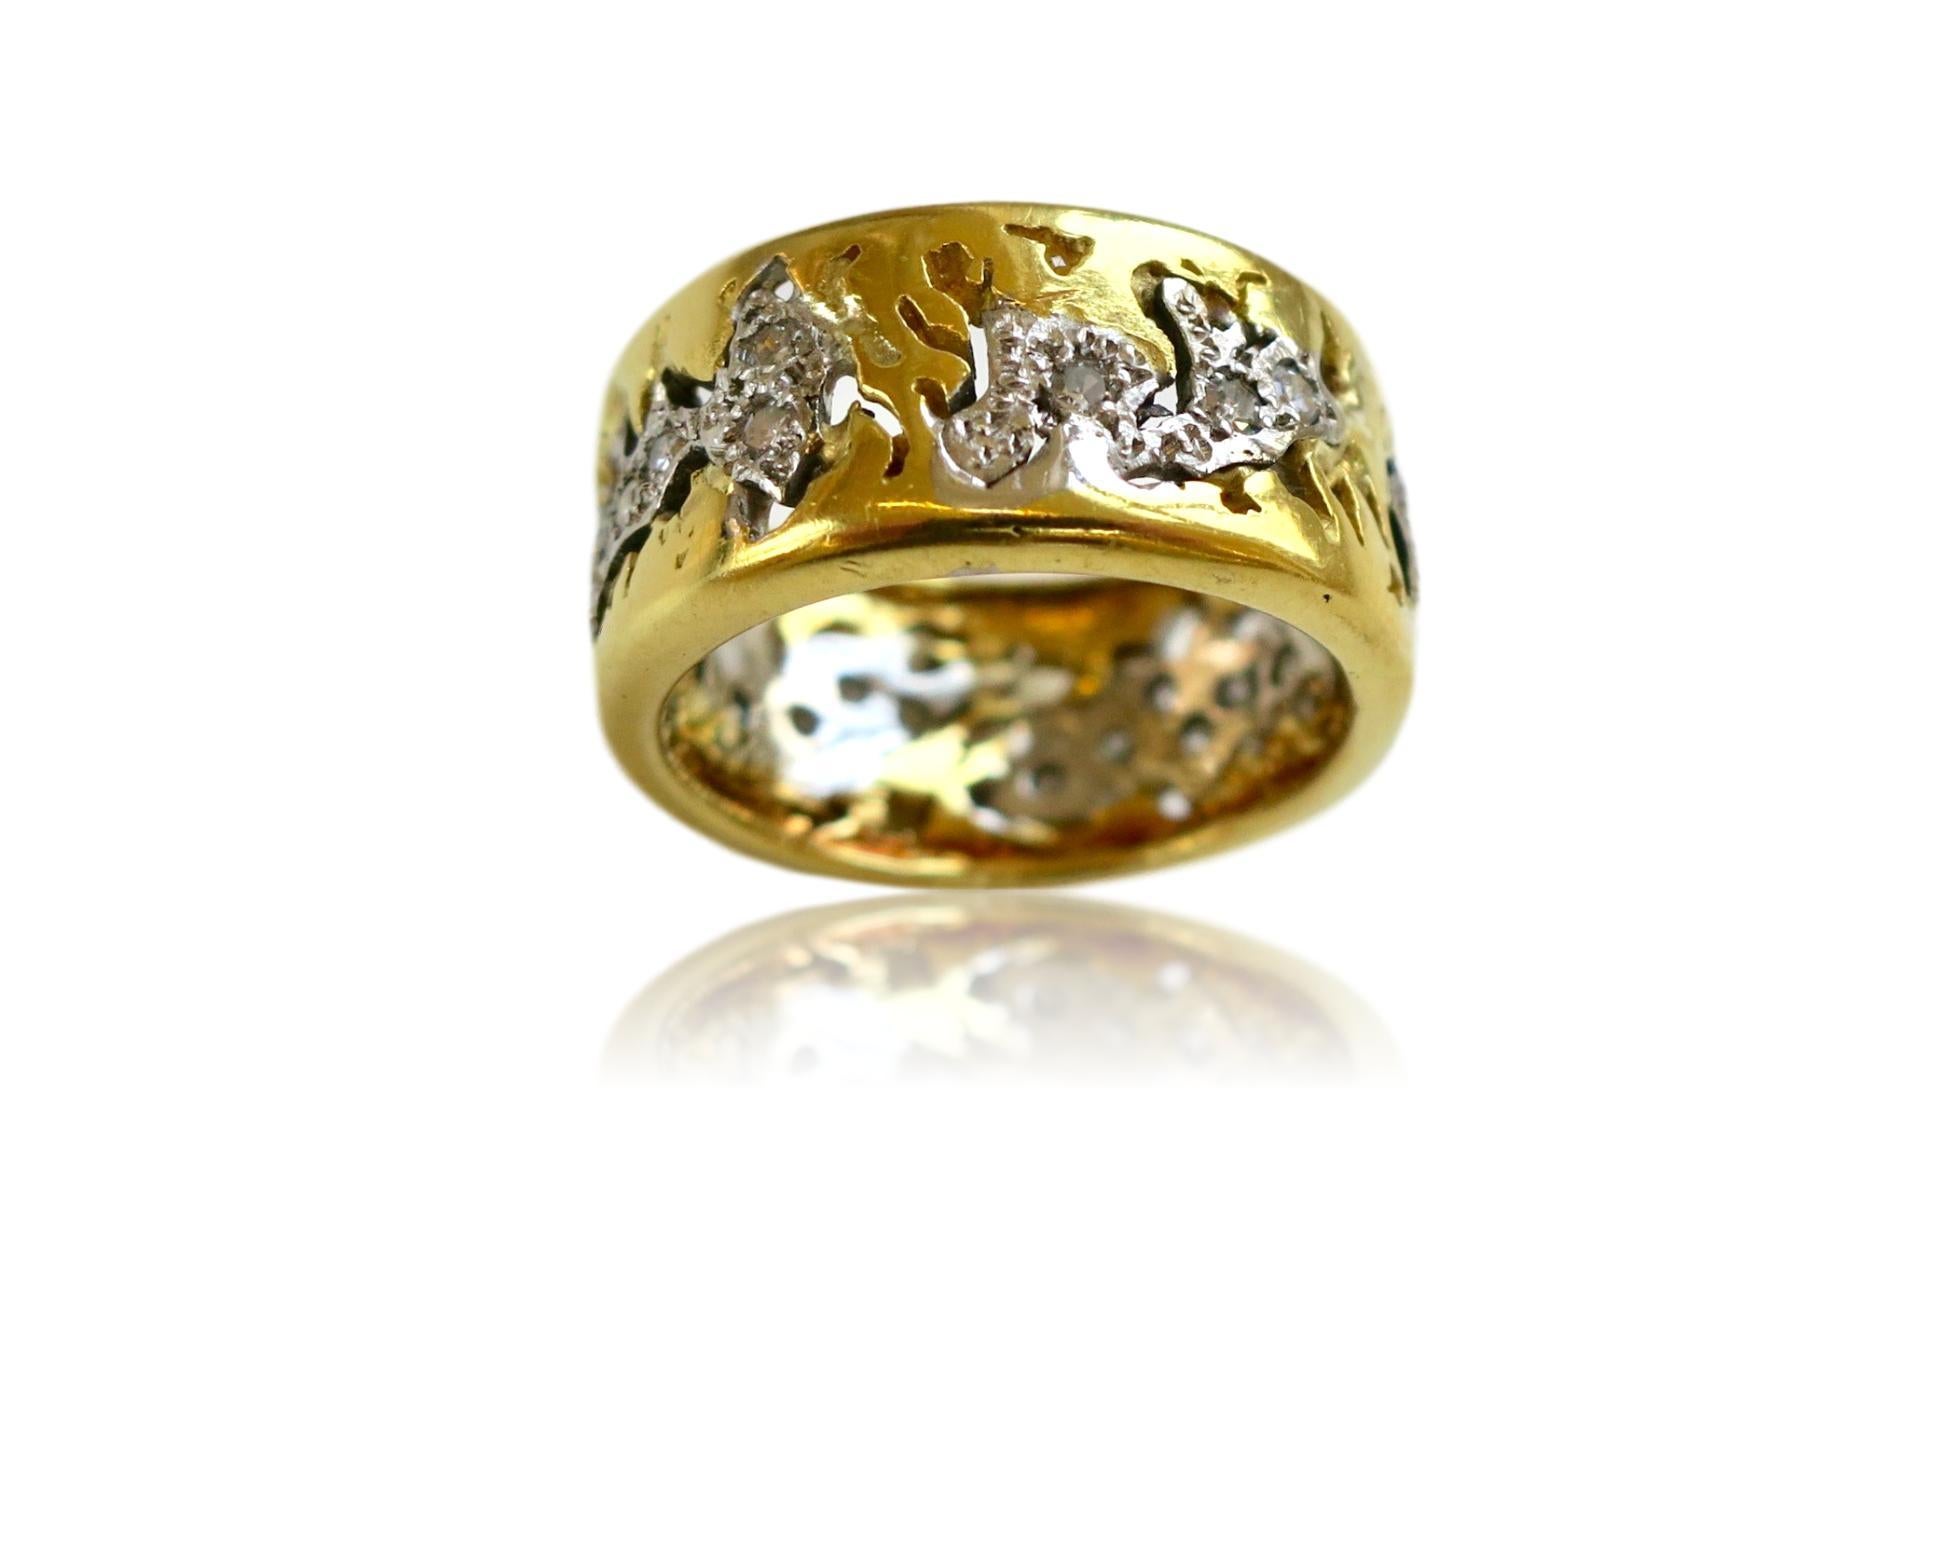 18k Yellow and white gold and diamond ring by British designer Charles de Temple. The pierced-work 3/8